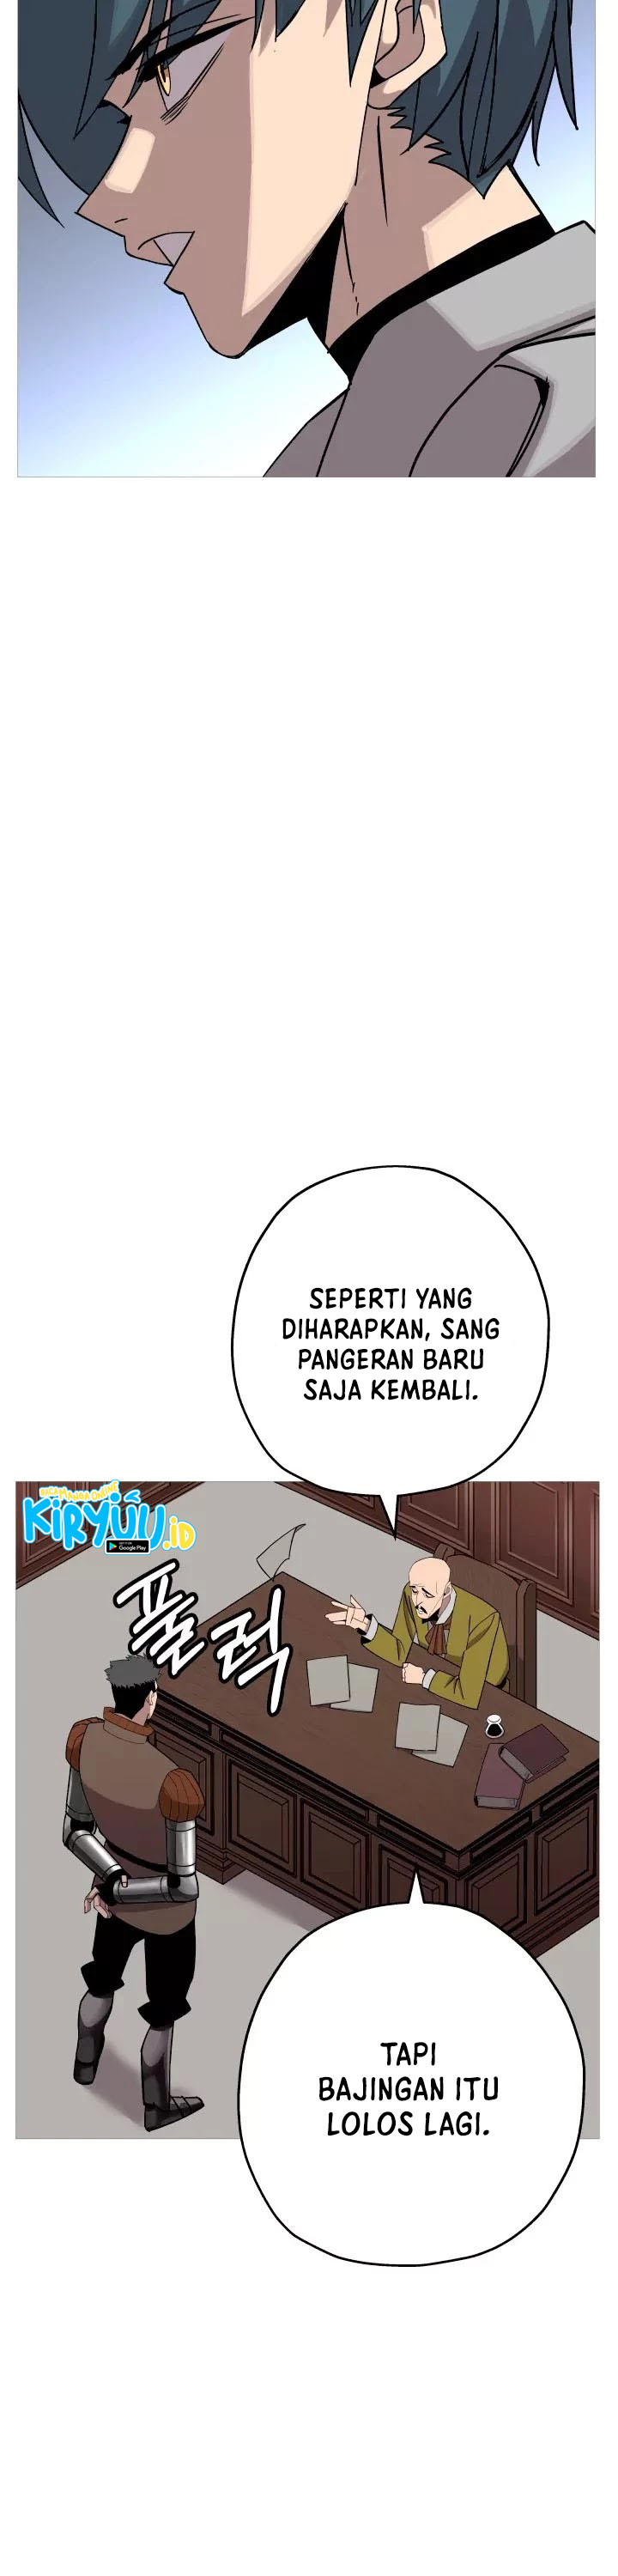 Dilarang COPAS - situs resmi www.mangacanblog.com - Komik the story of a low rank soldier becoming a monarch 075 - chapter 75 76 Indonesia the story of a low rank soldier becoming a monarch 075 - chapter 75 Terbaru 13|Baca Manga Komik Indonesia|Mangacan